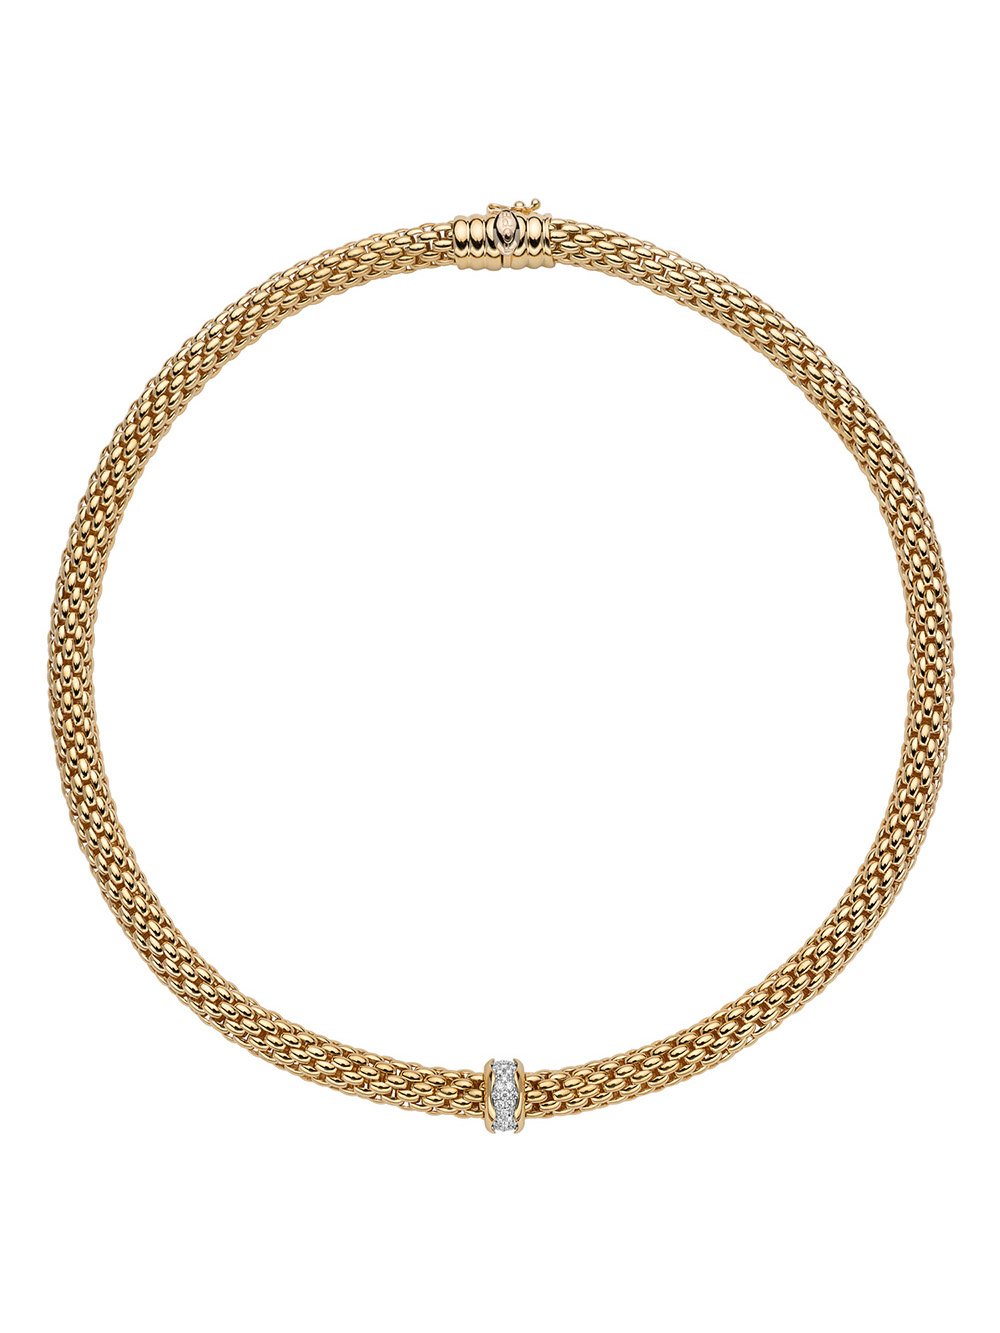 Fope Love Nest Necklace in 18ct Yellow Gold with Diamonds